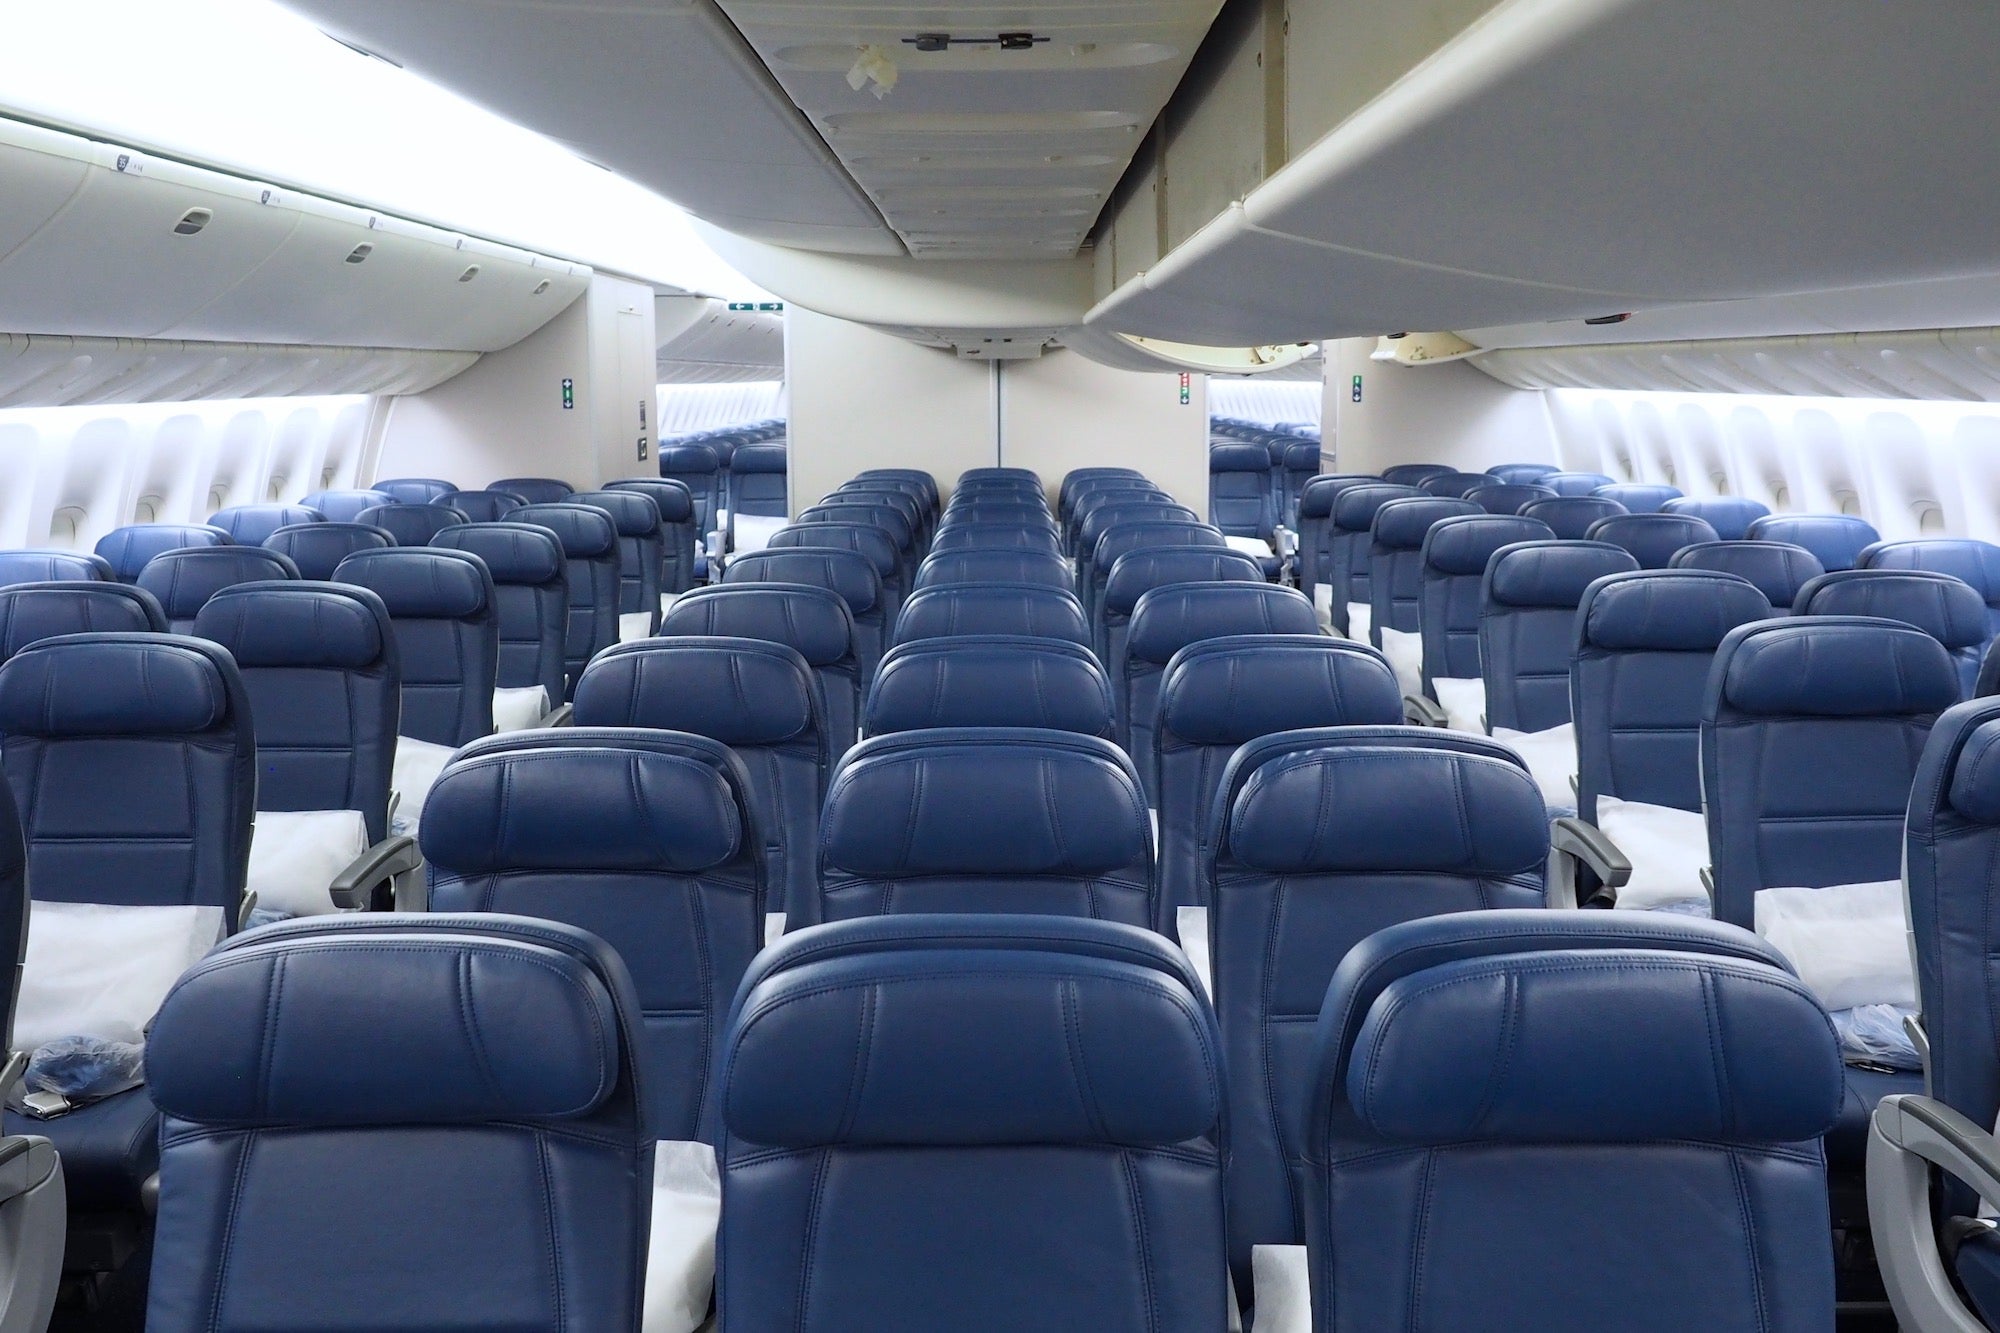 Main Cabin (economy) seating on the retrofitted Delta 777